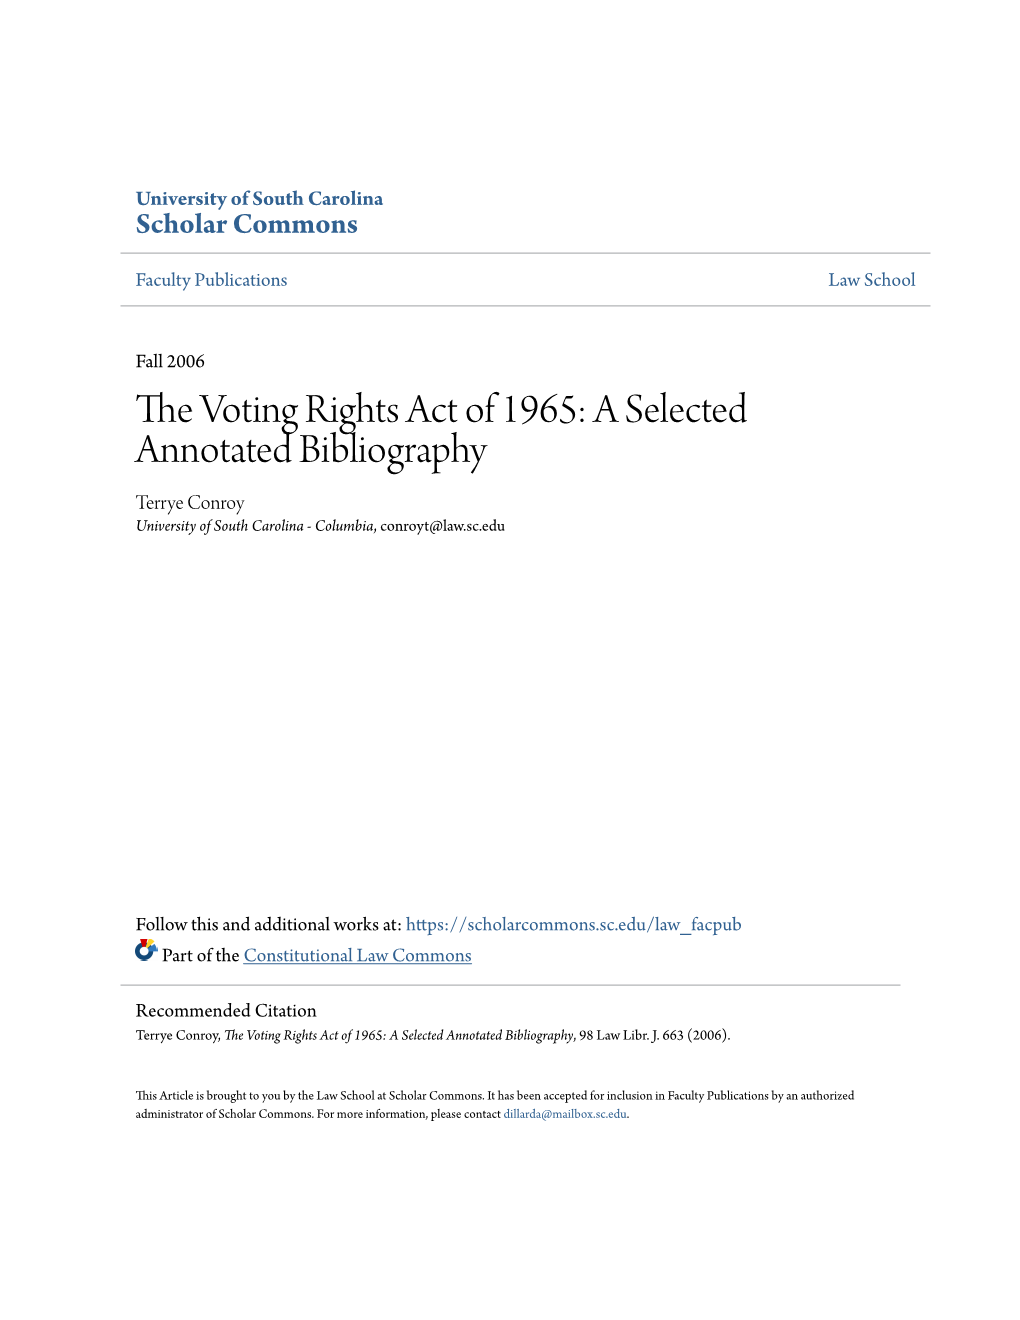 The Voting Rights Act of 1965: a Selected Annotated Bibliography, 98 Law Libr